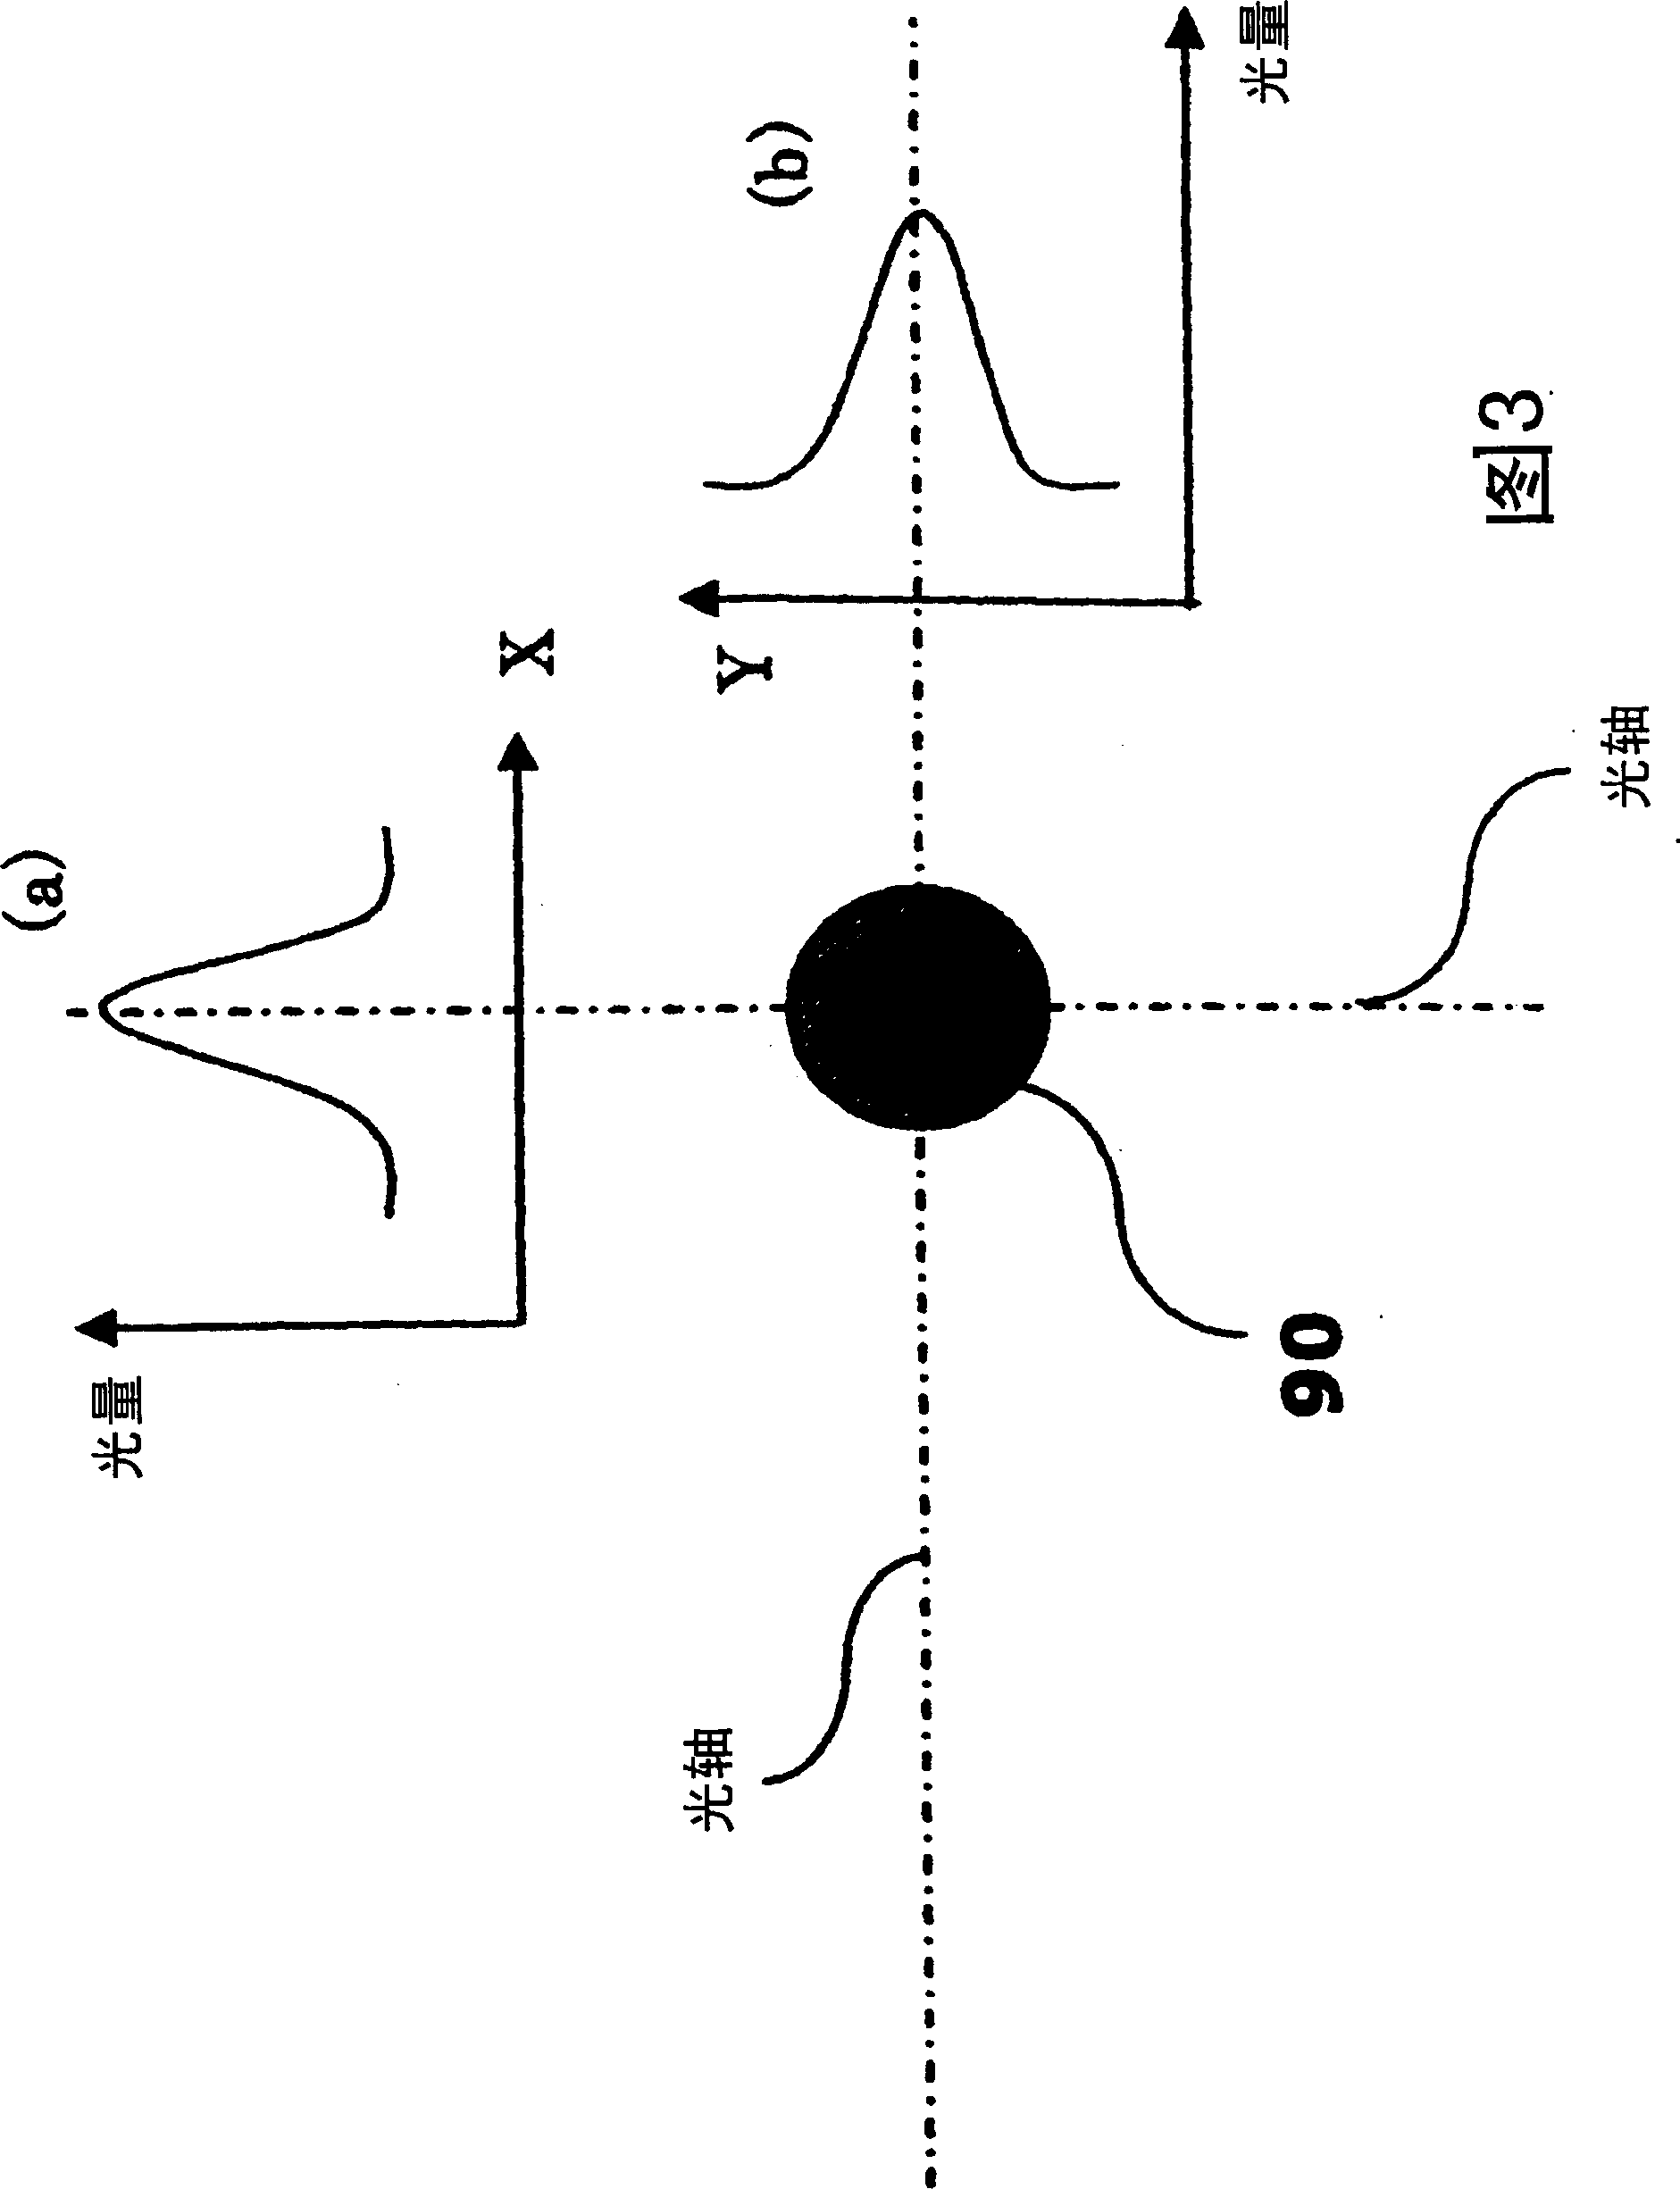 Shape of slit opening and dimming device